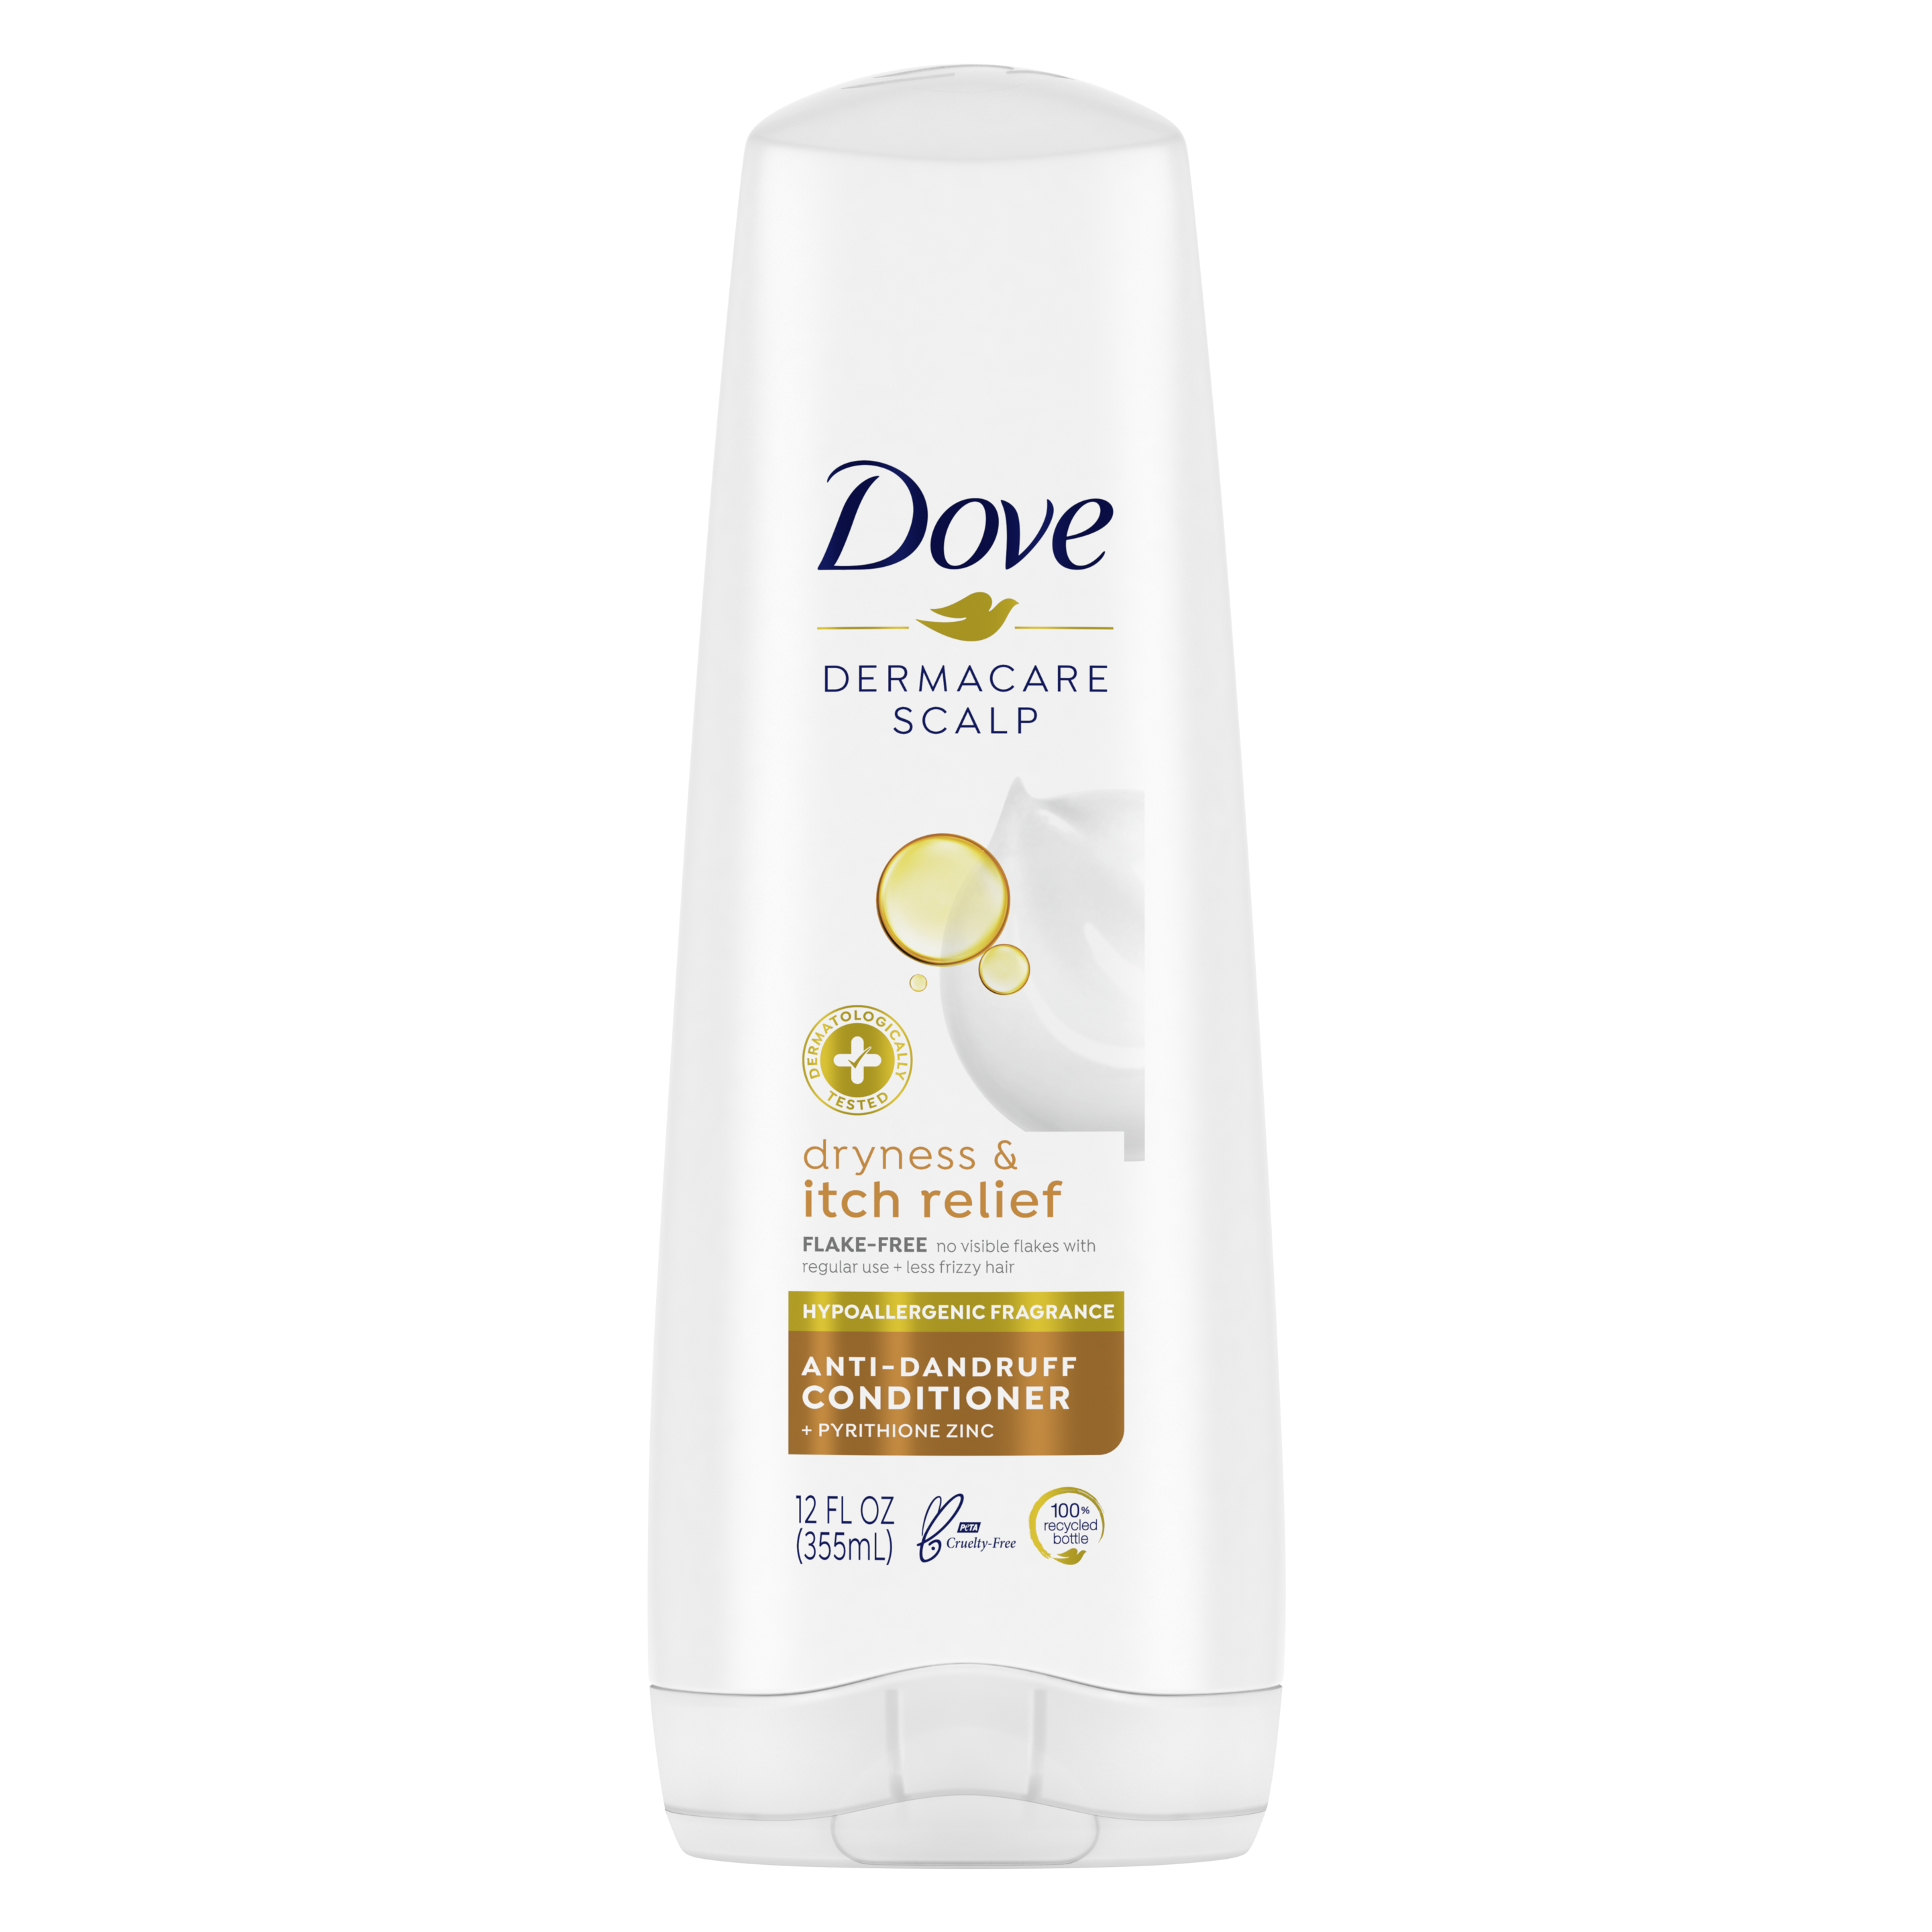 Dove Dermacare Scalp Dryness & Itch Relief Conditioner 12 oz